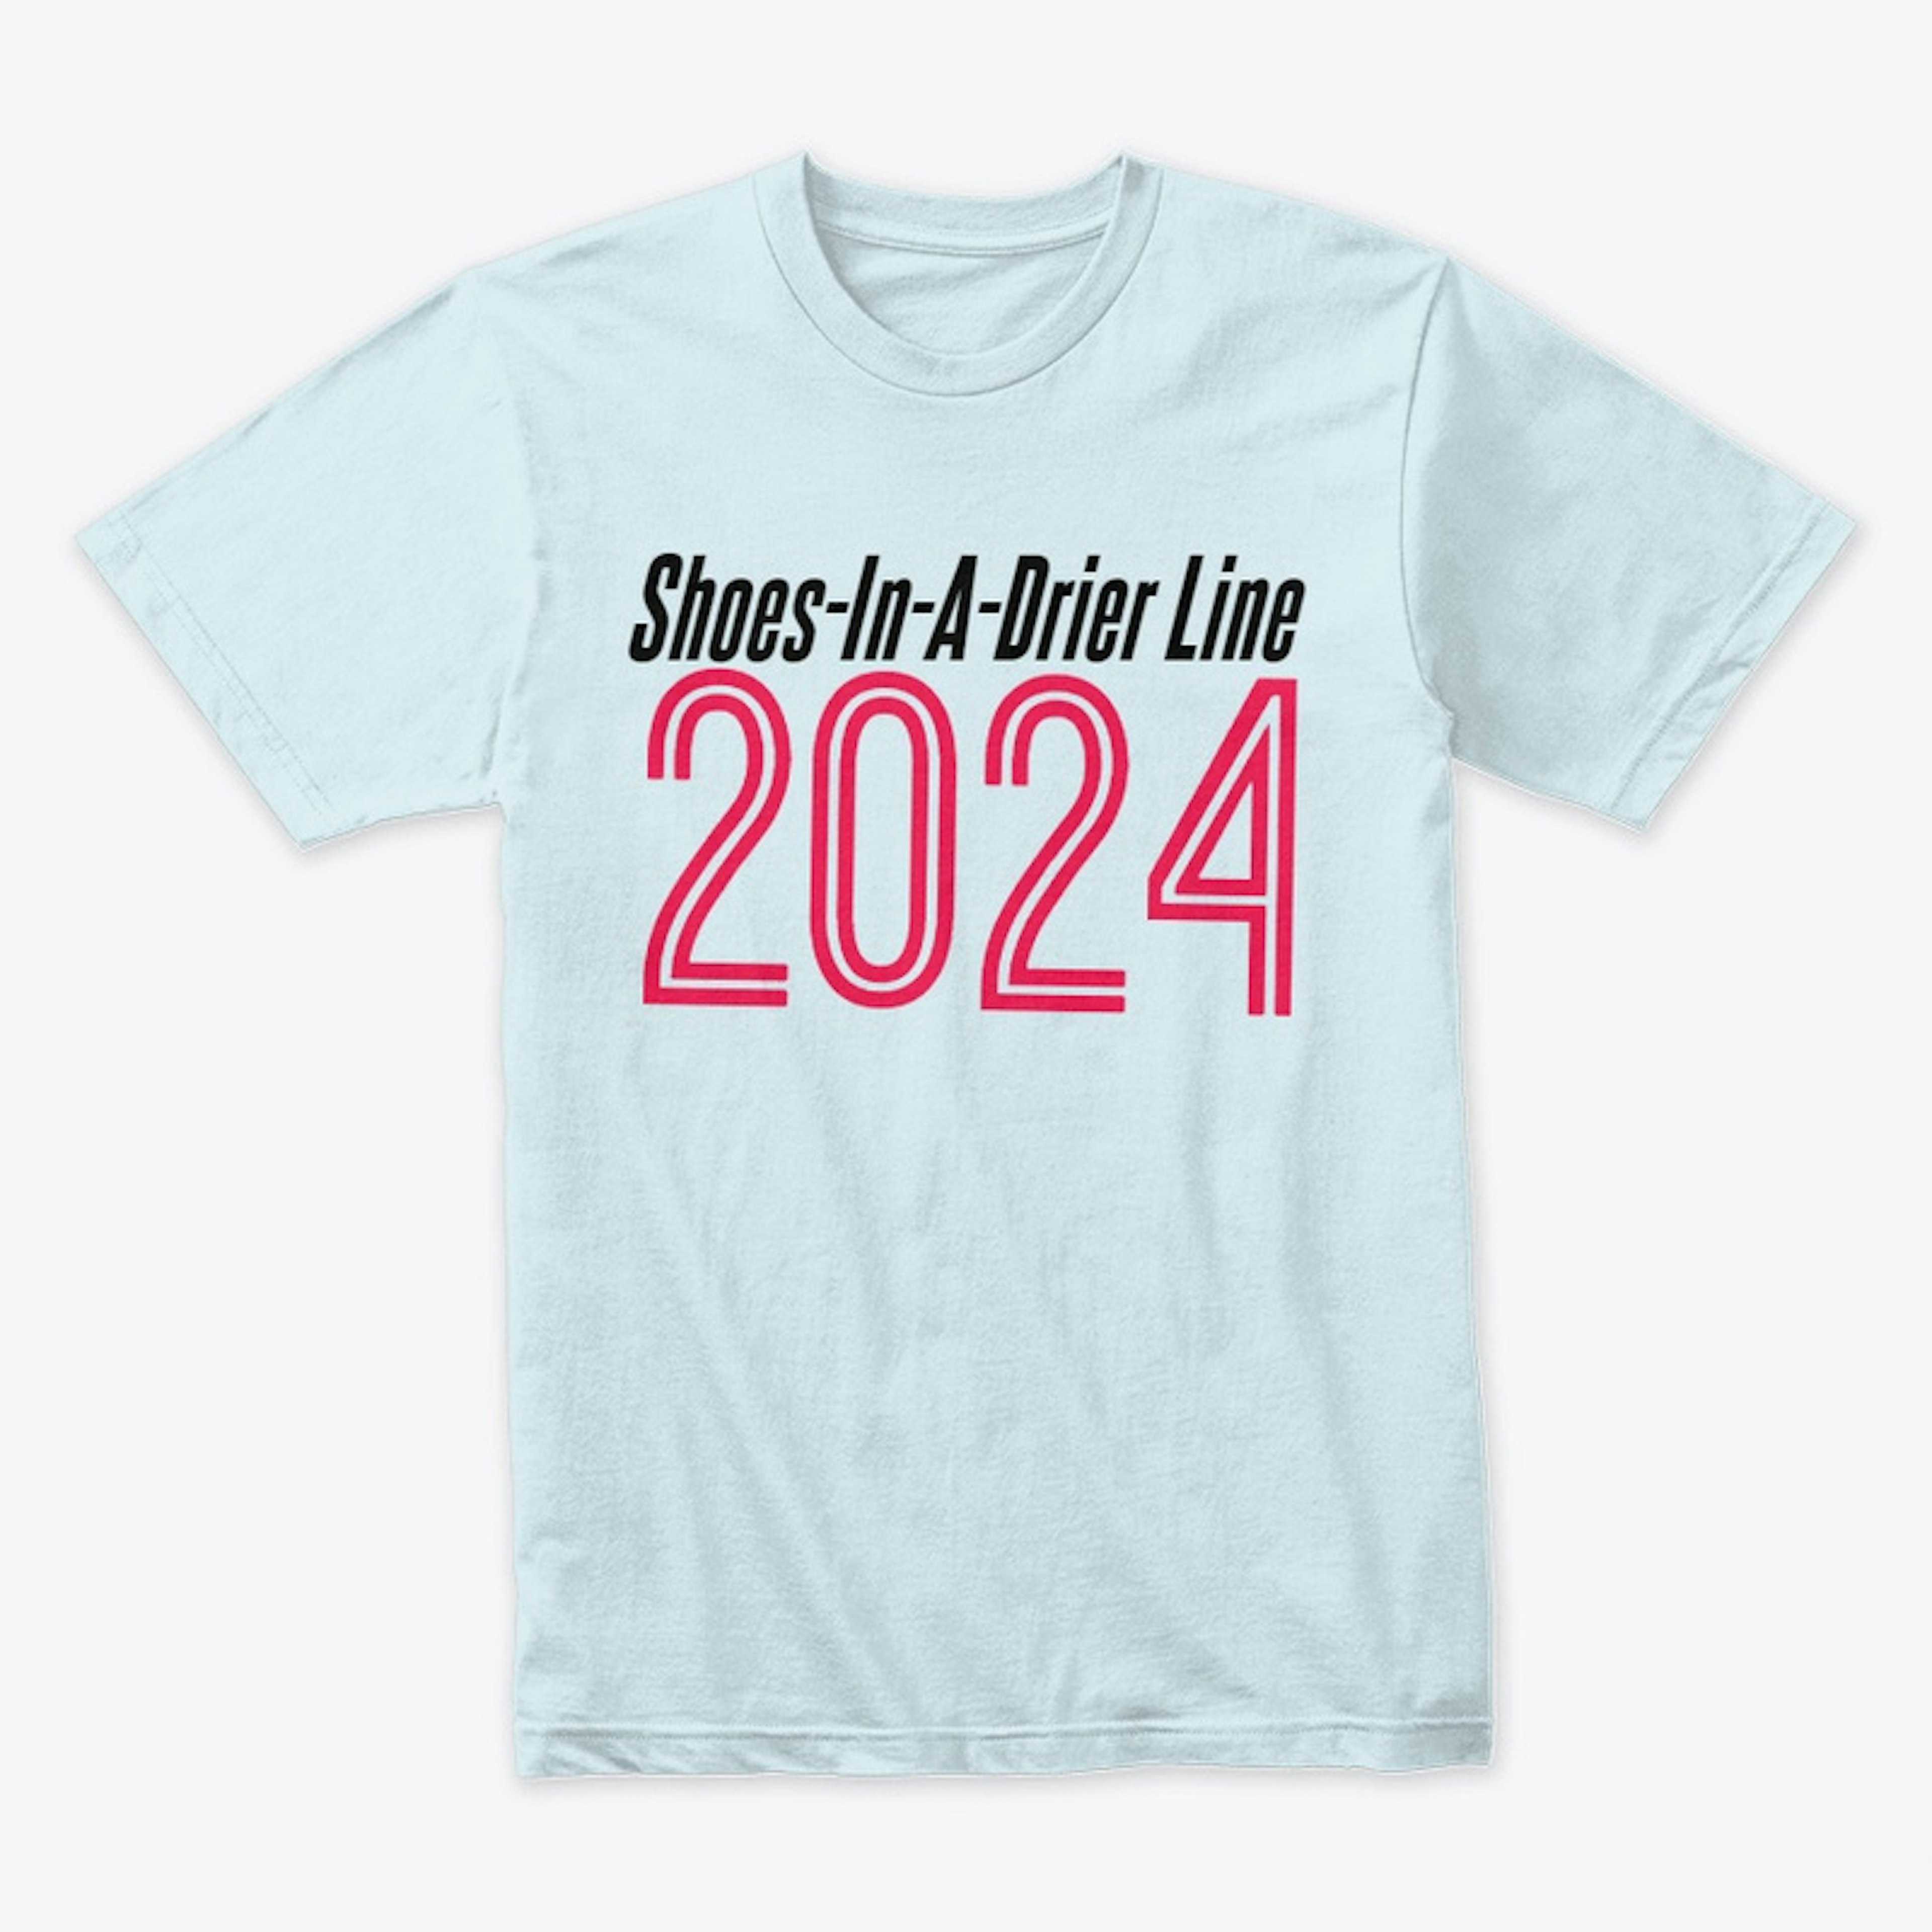 Shoes-In-A-Drier Line Drumline Shirt